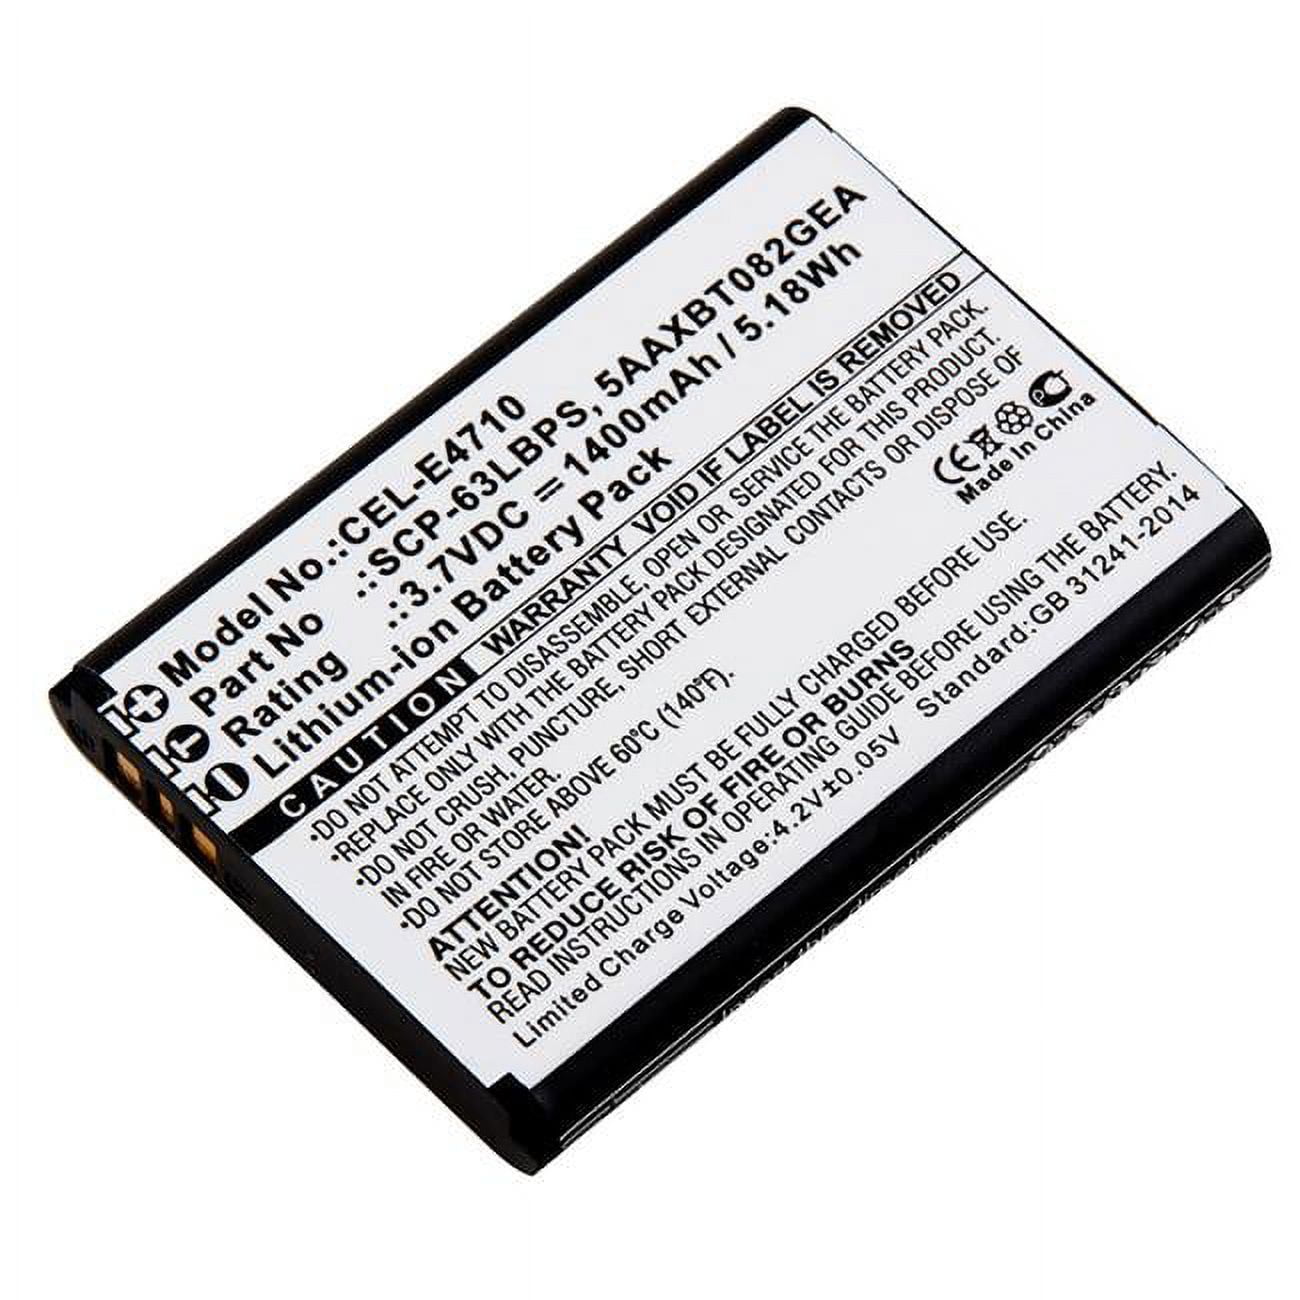 Picture of Ultralast CEL-E4710 3.7V & 1400 mAh Replacement Lithium-Ion Battery for Kyocera Dura XV plus&#44; DuraXA-DuraXE DuraXTP & DuraXV